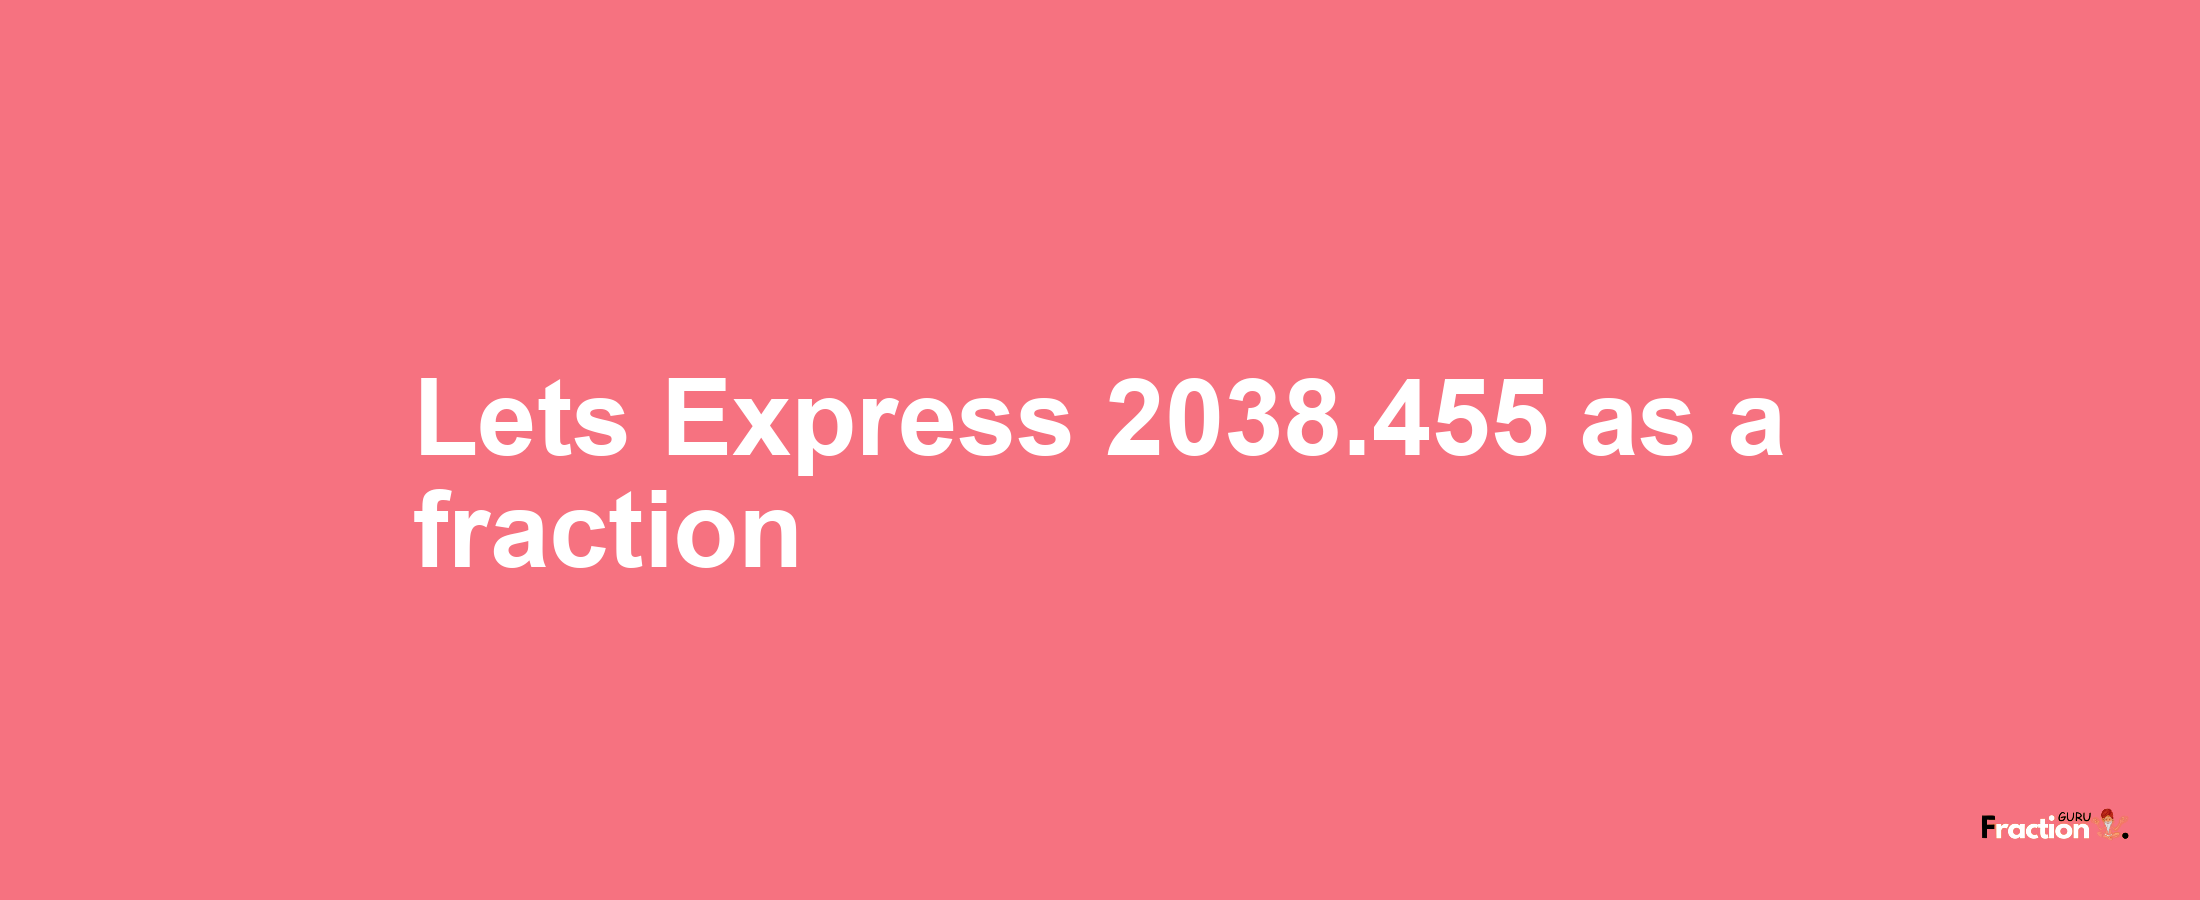 Lets Express 2038.455 as afraction